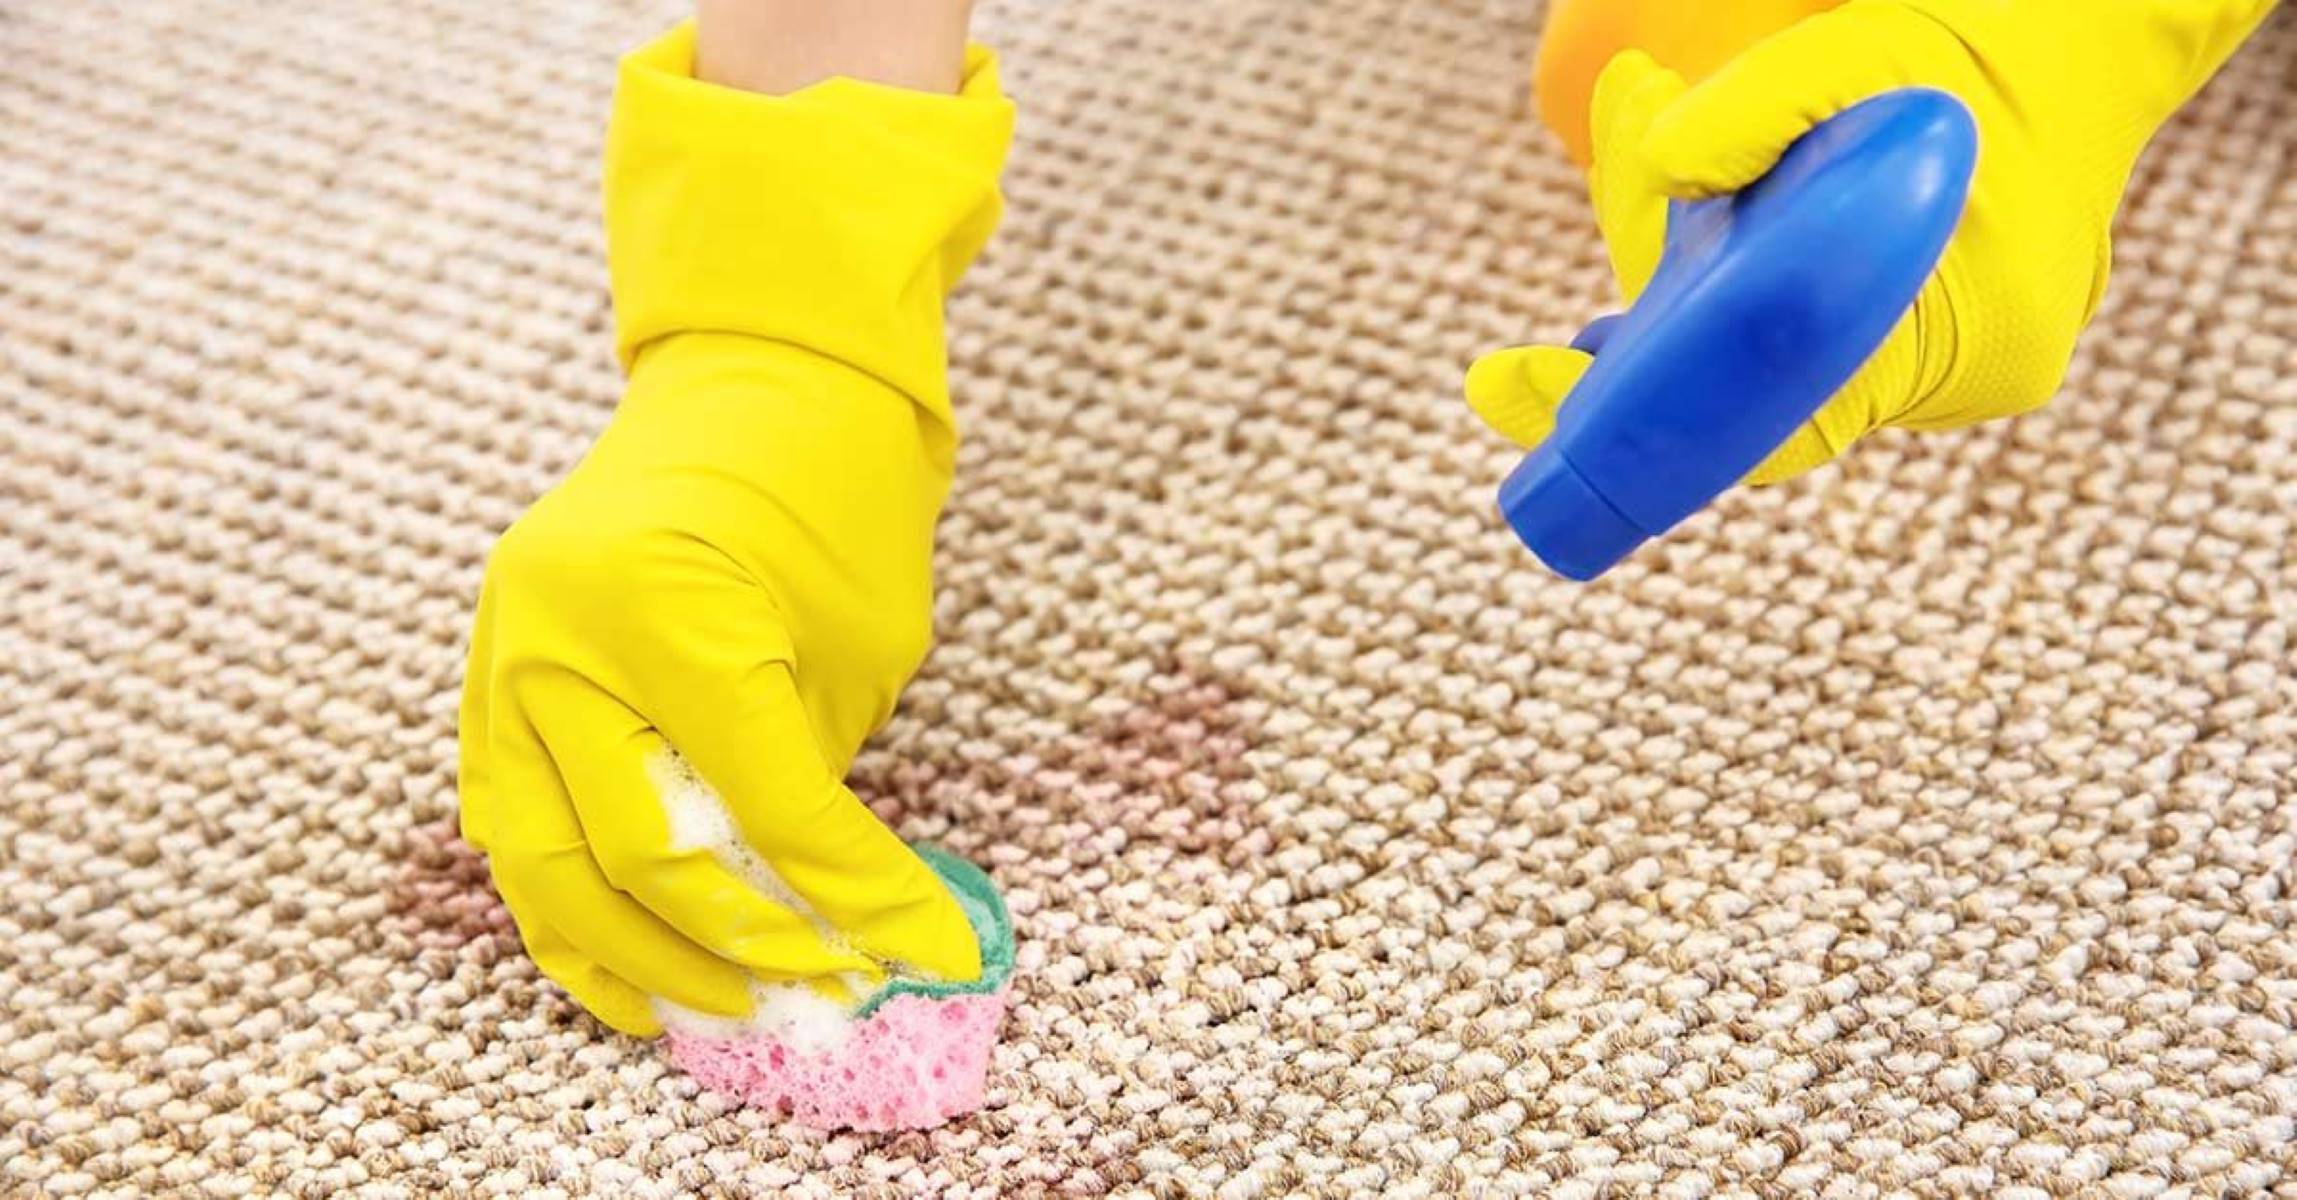 How To Get WD-40 Out Of A Carpet